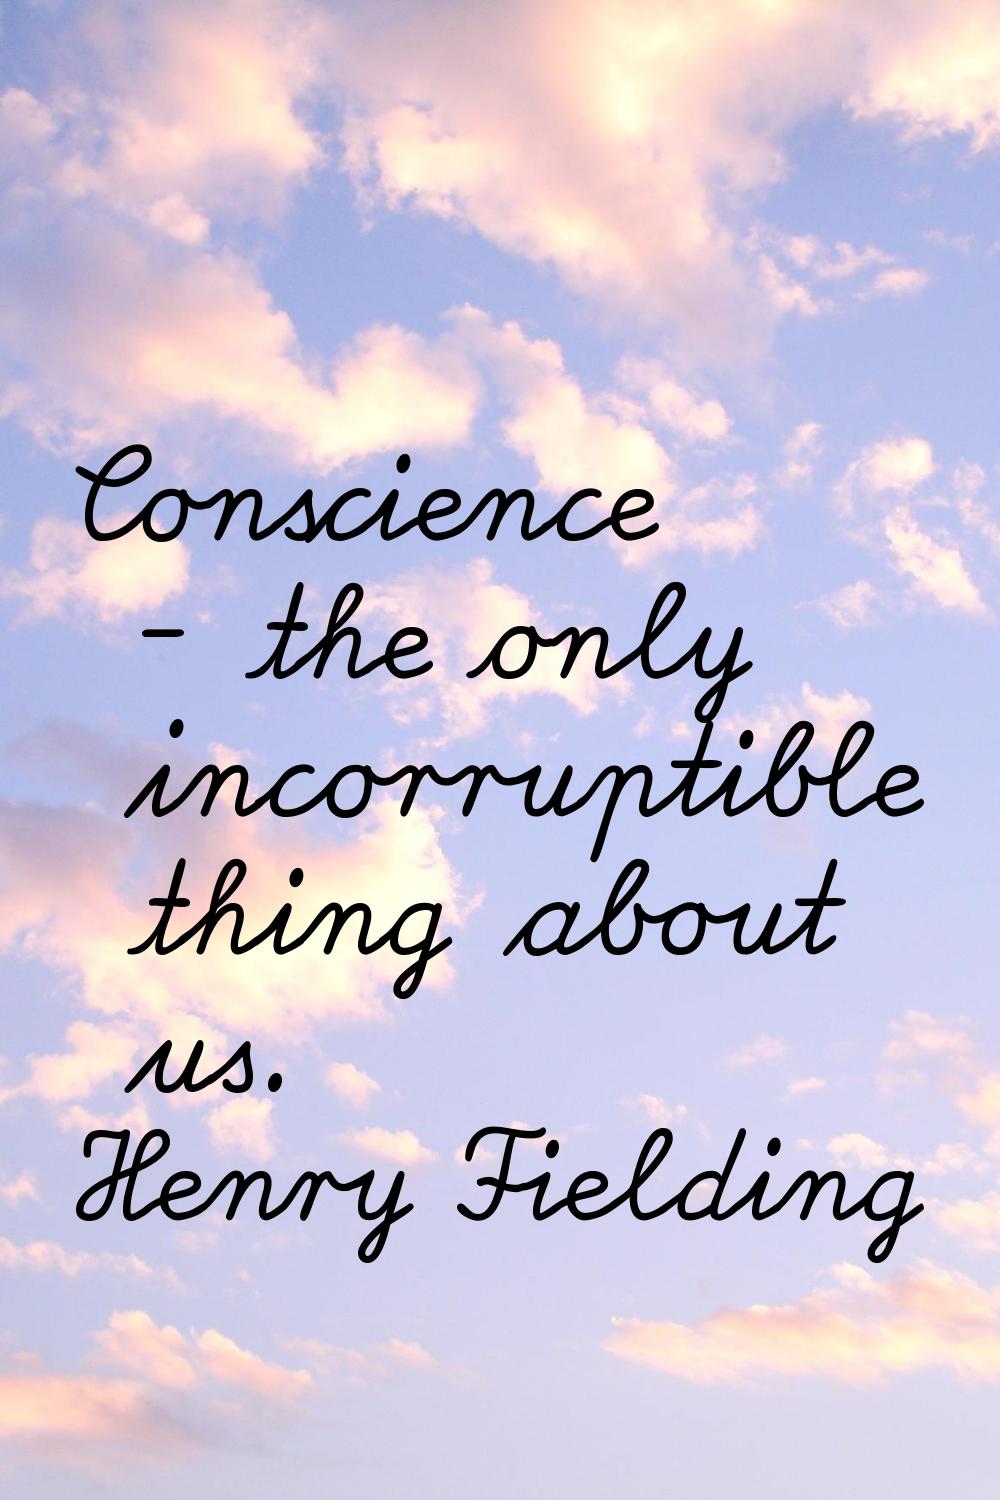 Conscience - the only incorruptible thing about us.